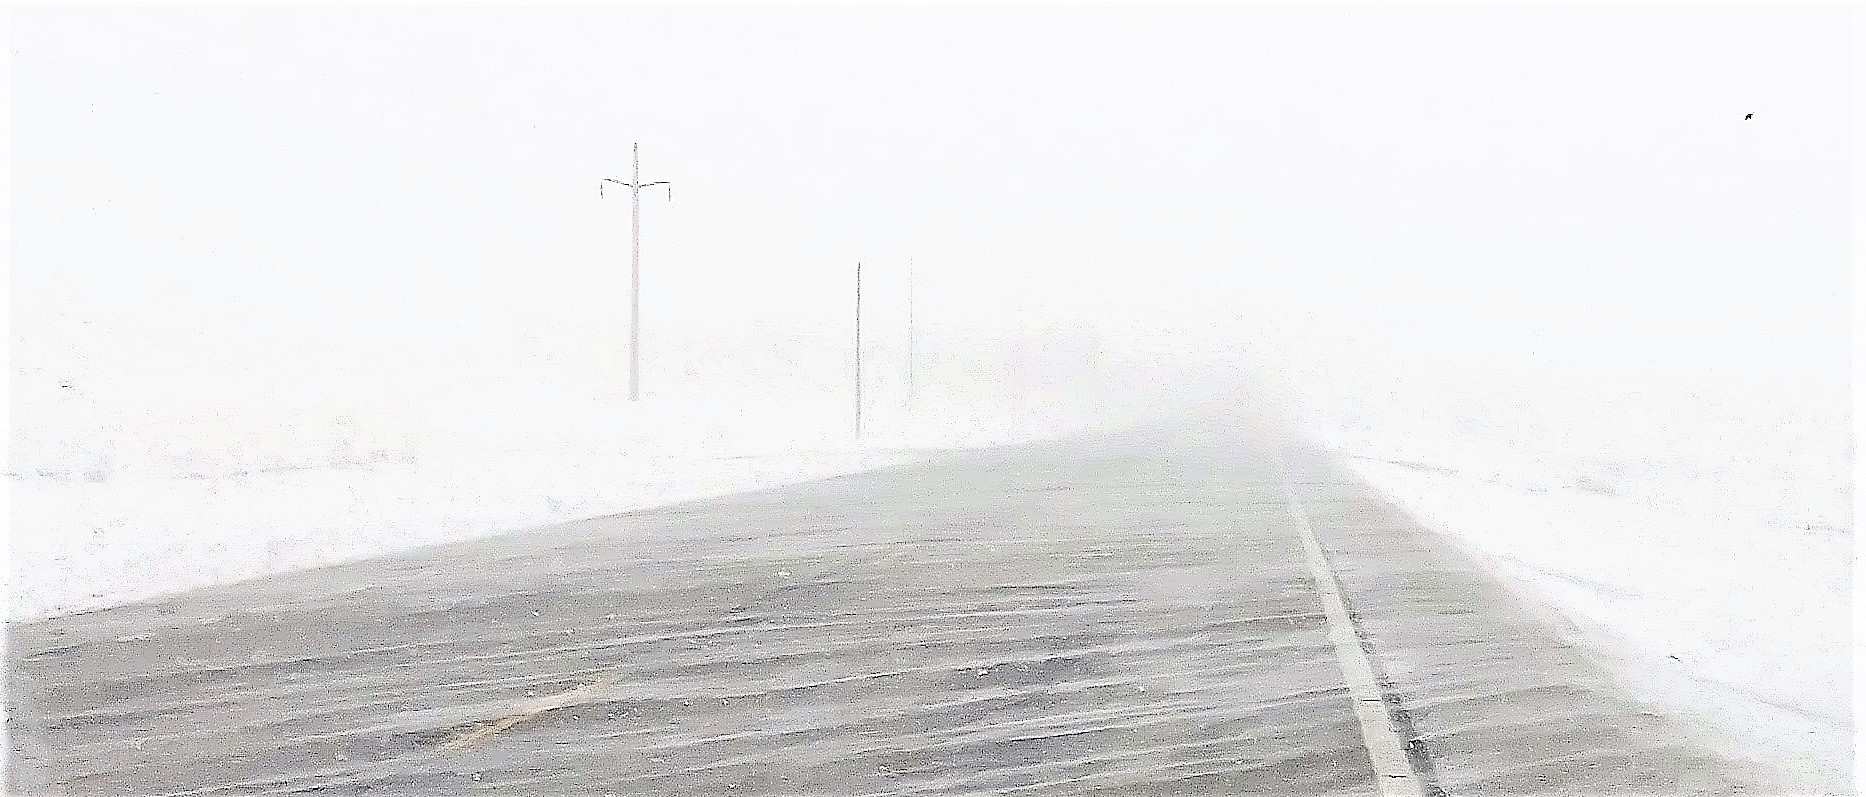 road during white out conditions.